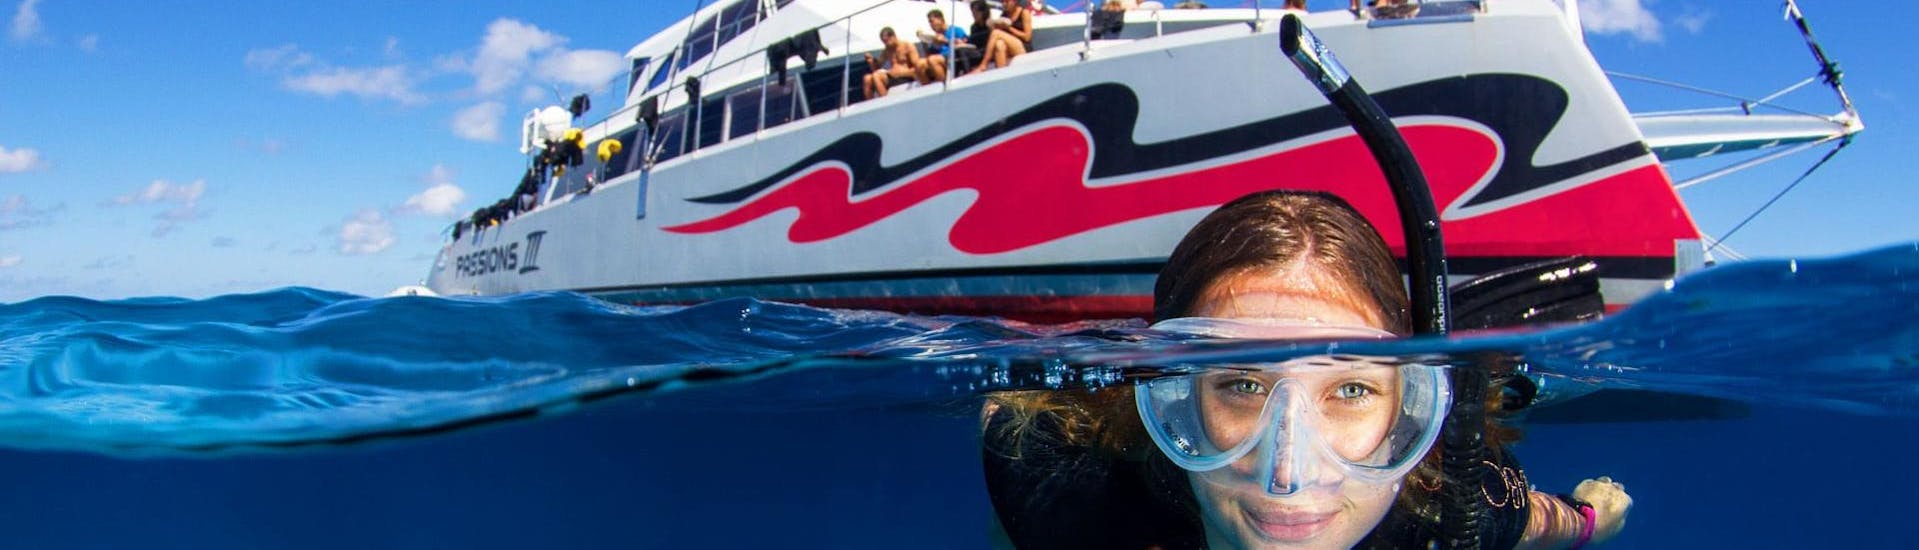 A young woman is exploring the marine wonderland during the Boat Tour with Snorkeling on the Great Barrier Reef organised by Passions of Paradise.